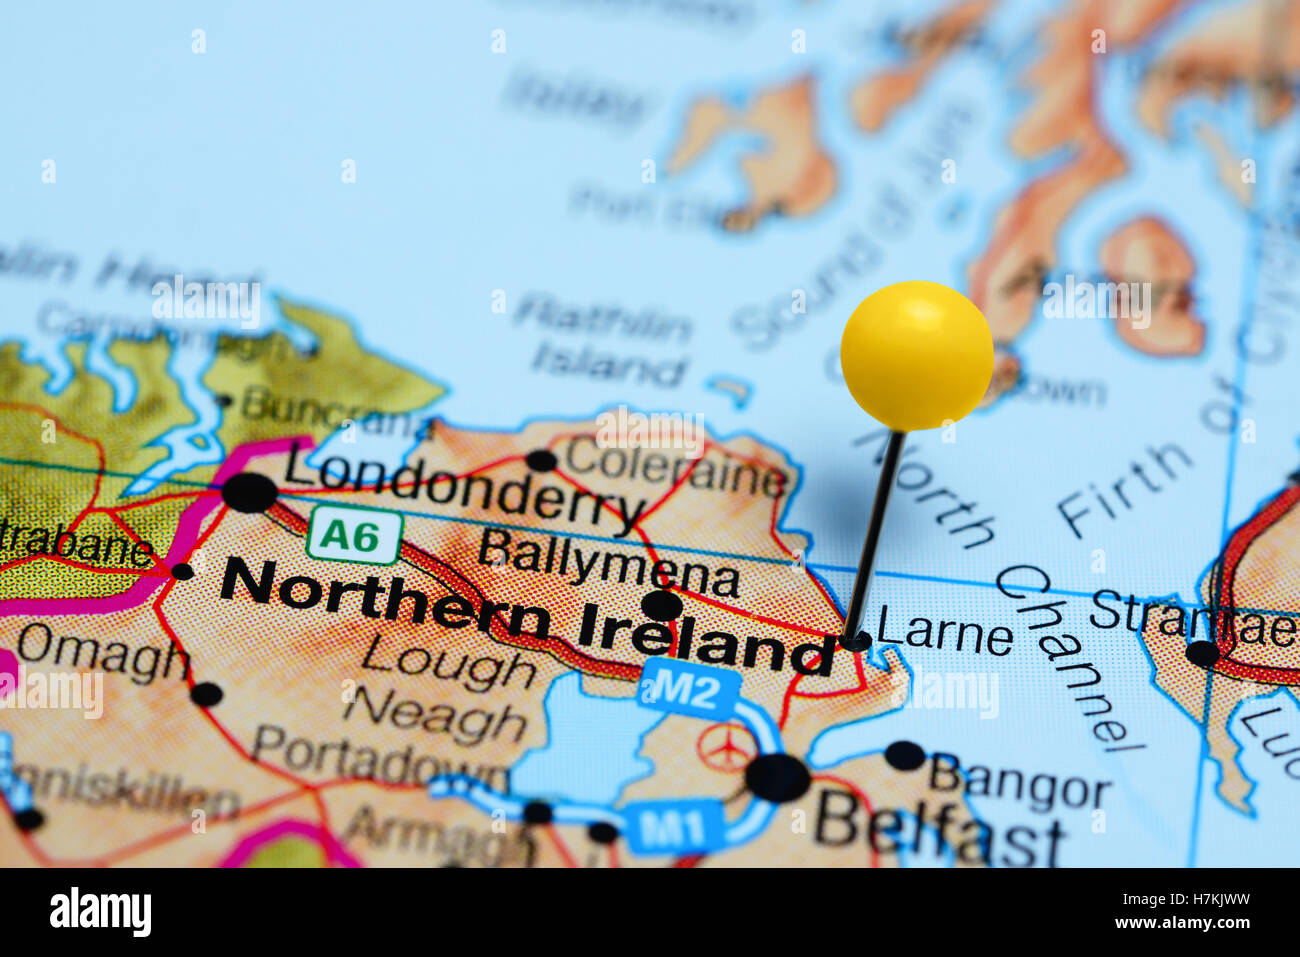 Larne pinned on a map of Northern Ireland Stock Photo